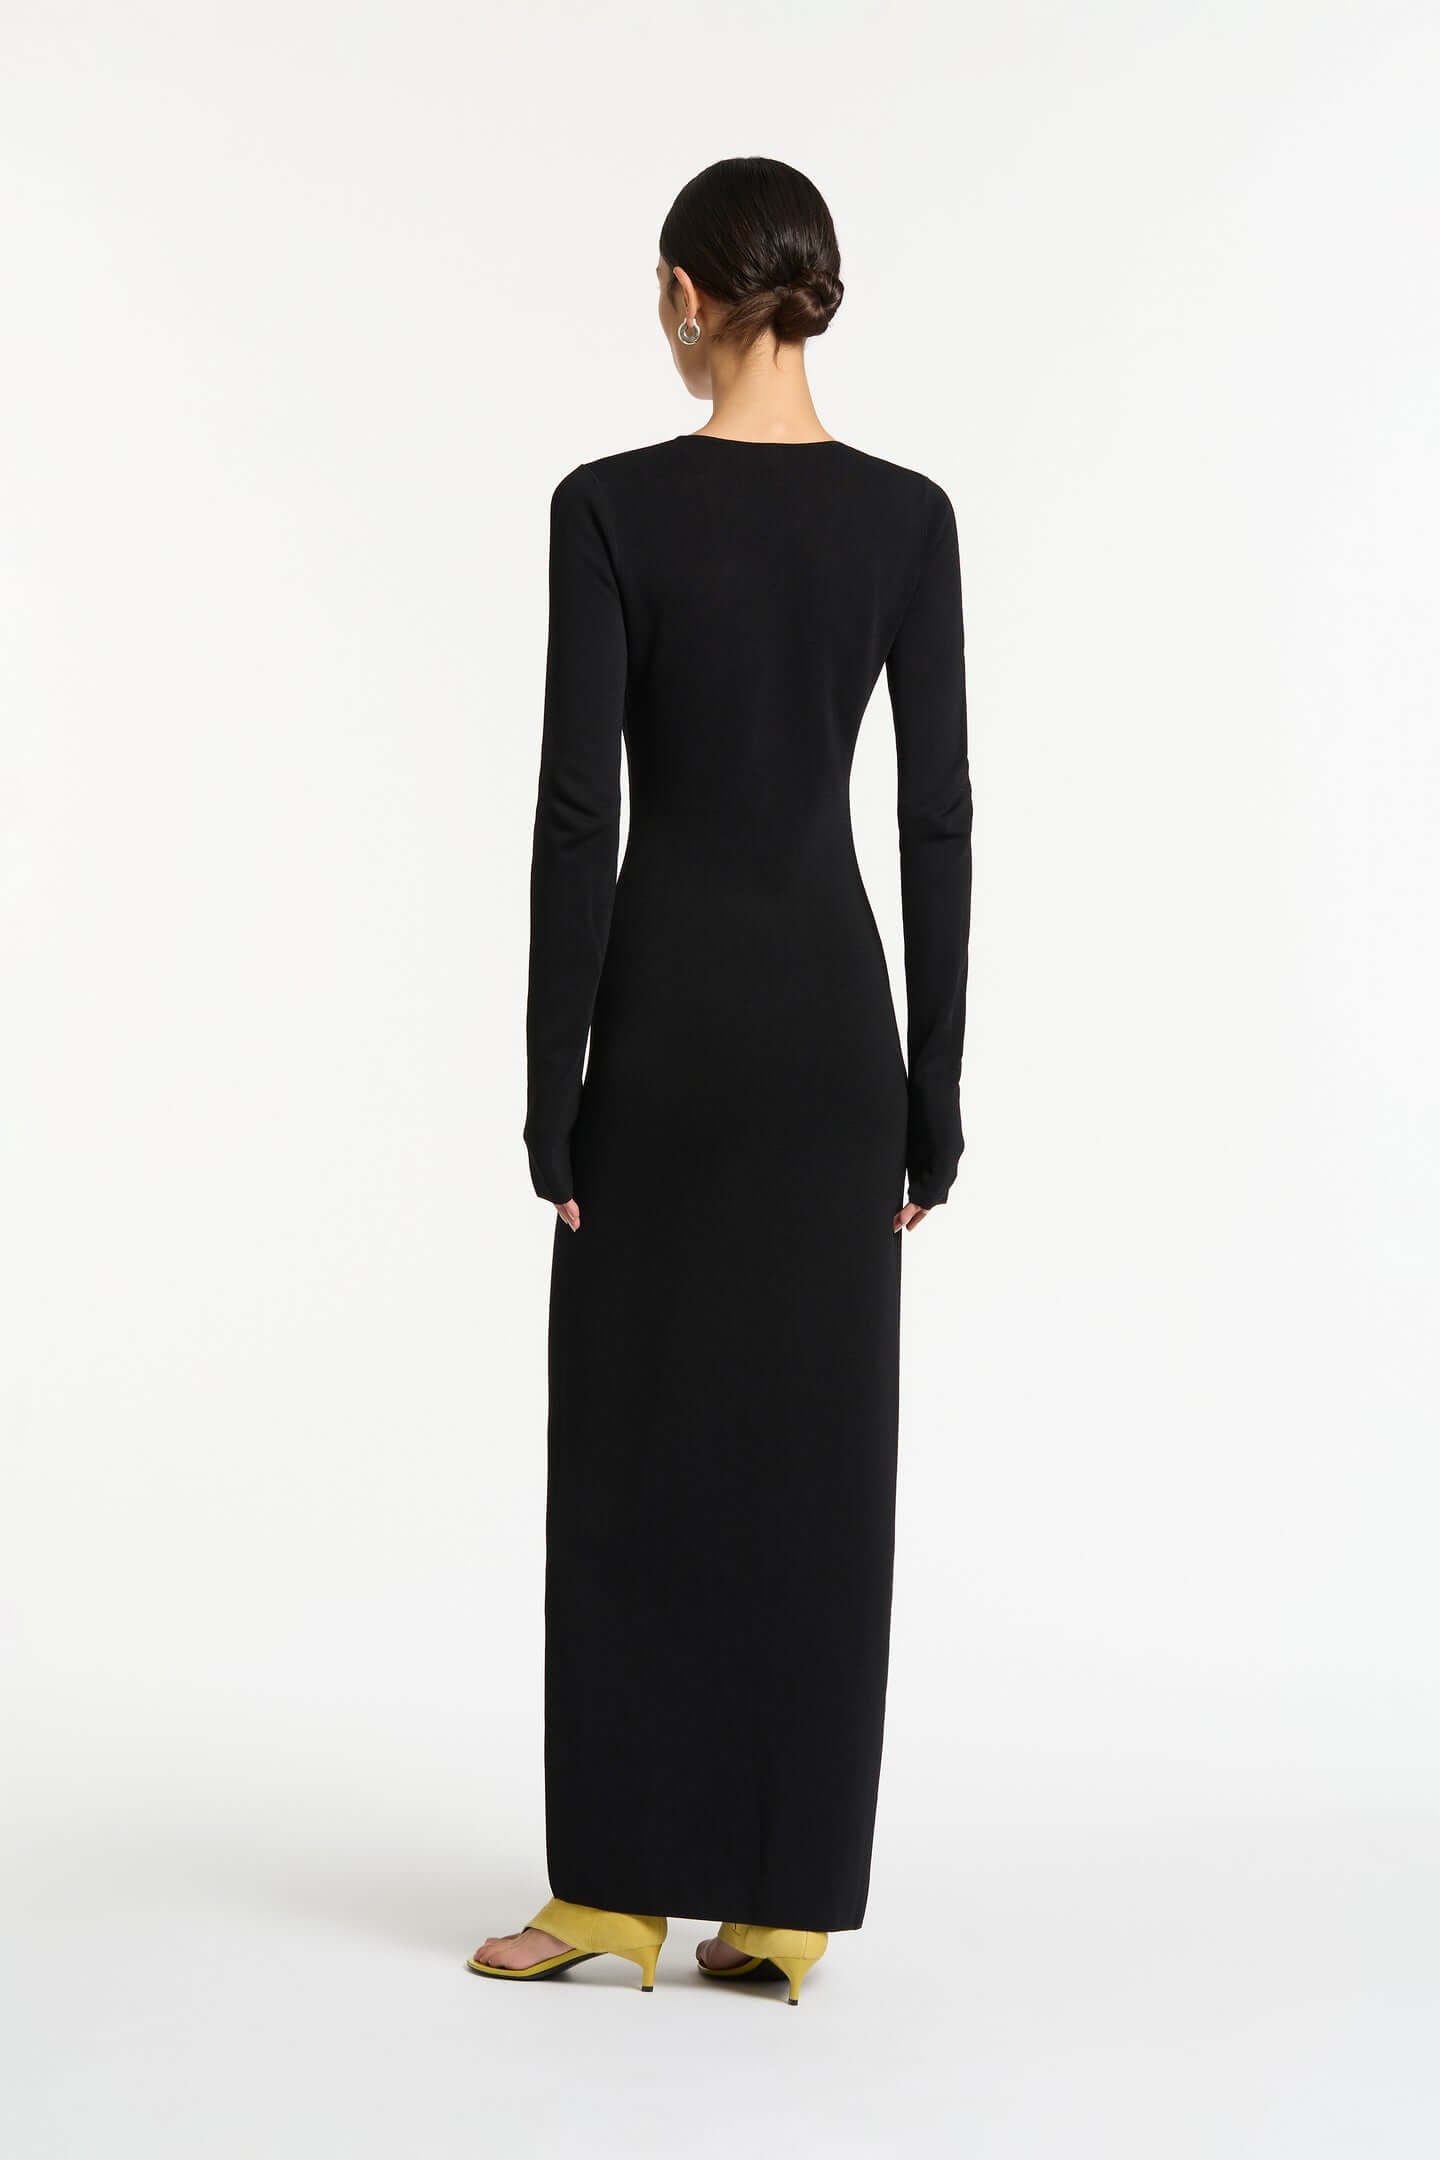 SIR Kinetic Beaded Long Sleeve Midi Dress in Black available at TNT The New Trend Australia